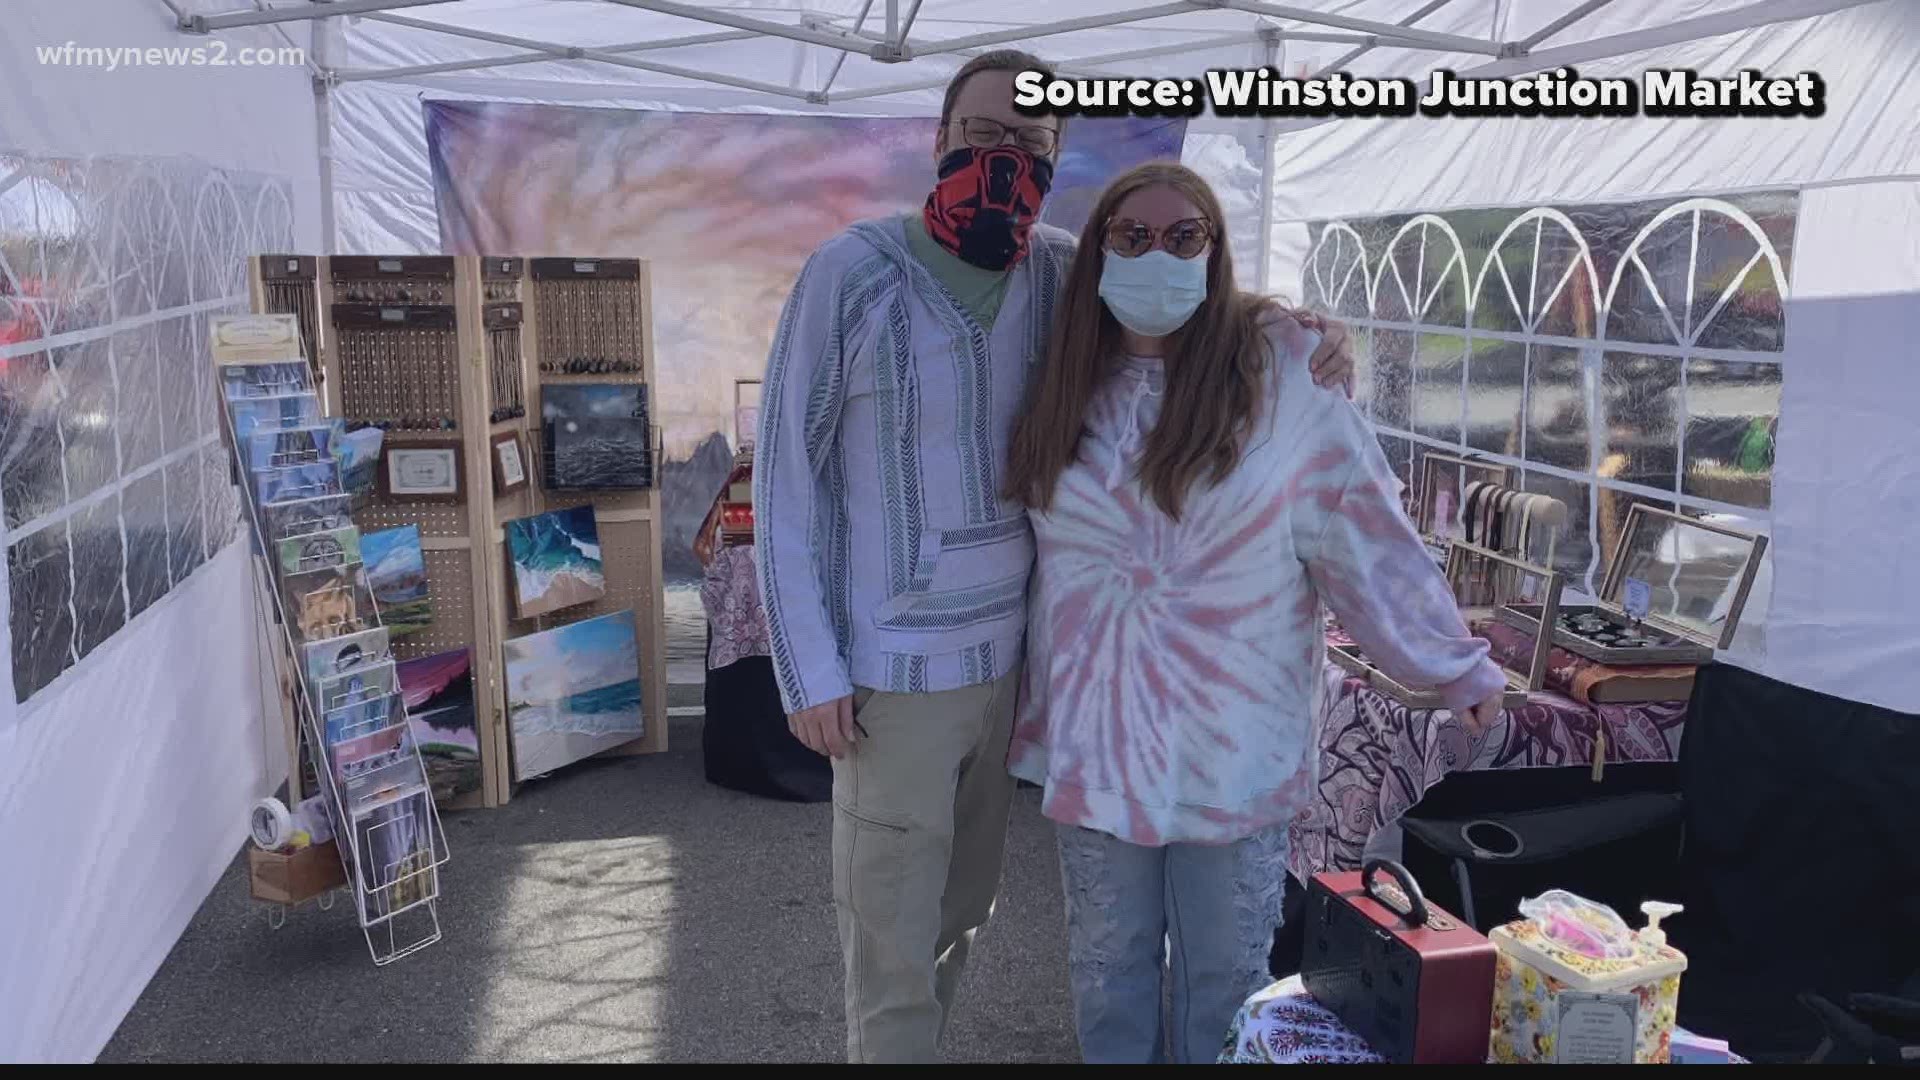 The Winston Junction is holding its Winter Market this Saturday. It is a socially distanced artisan and craft maker's market.